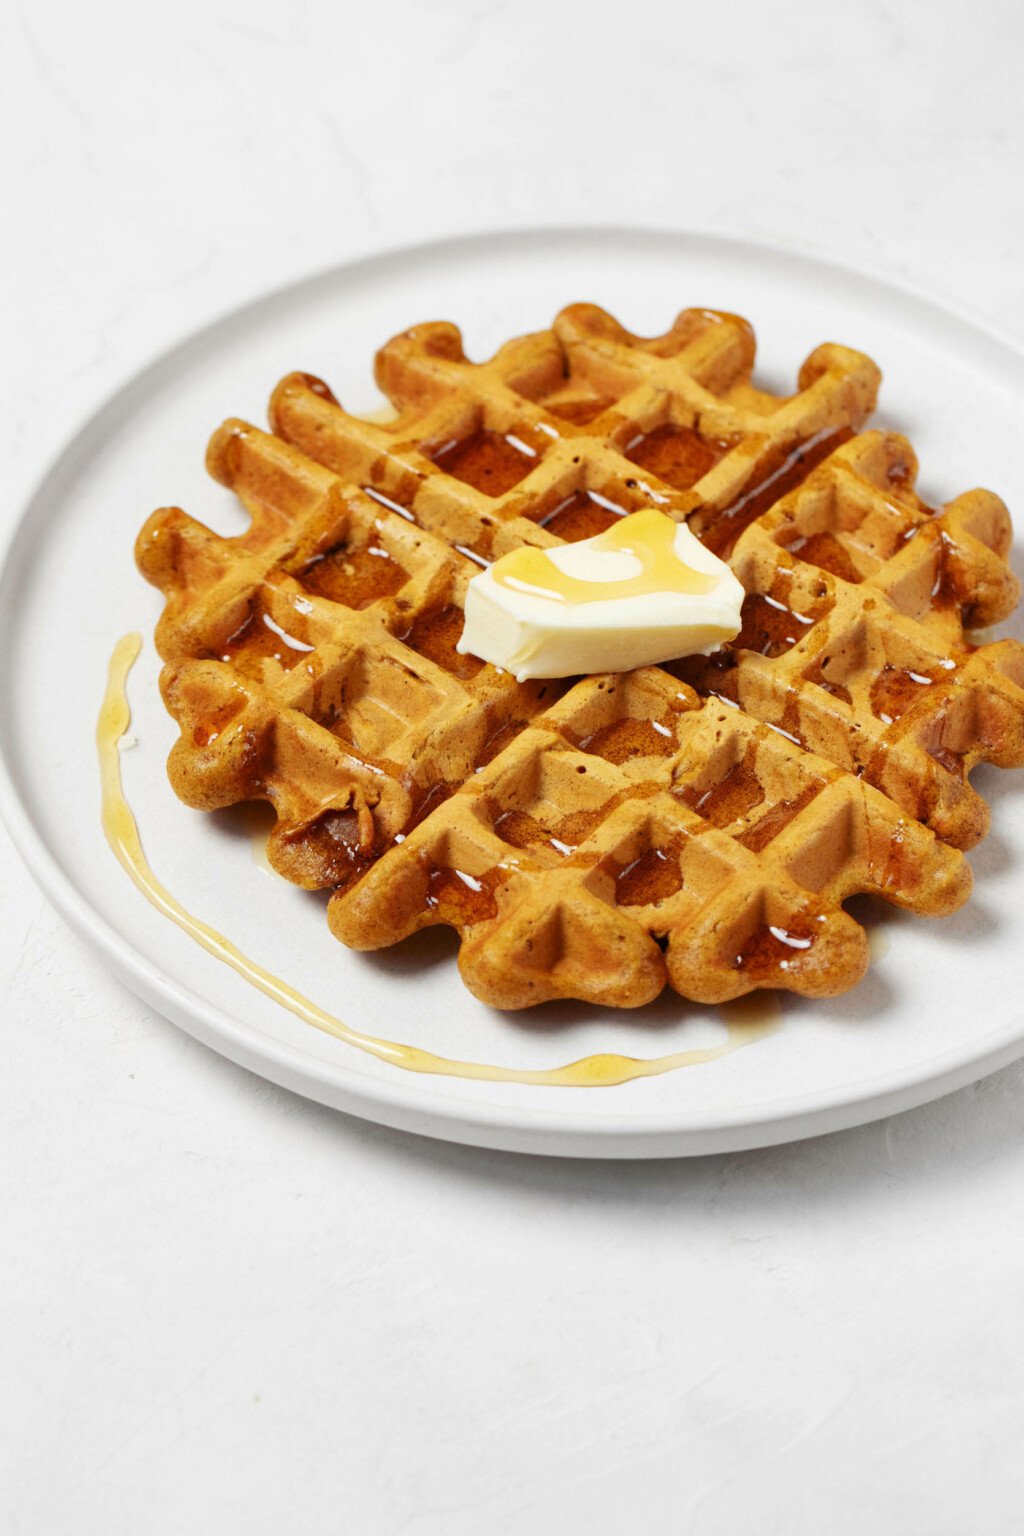 A round, white plate is topped with a deeply golden colored, toasted waffle. The waffle has been topped with butter and syrup.